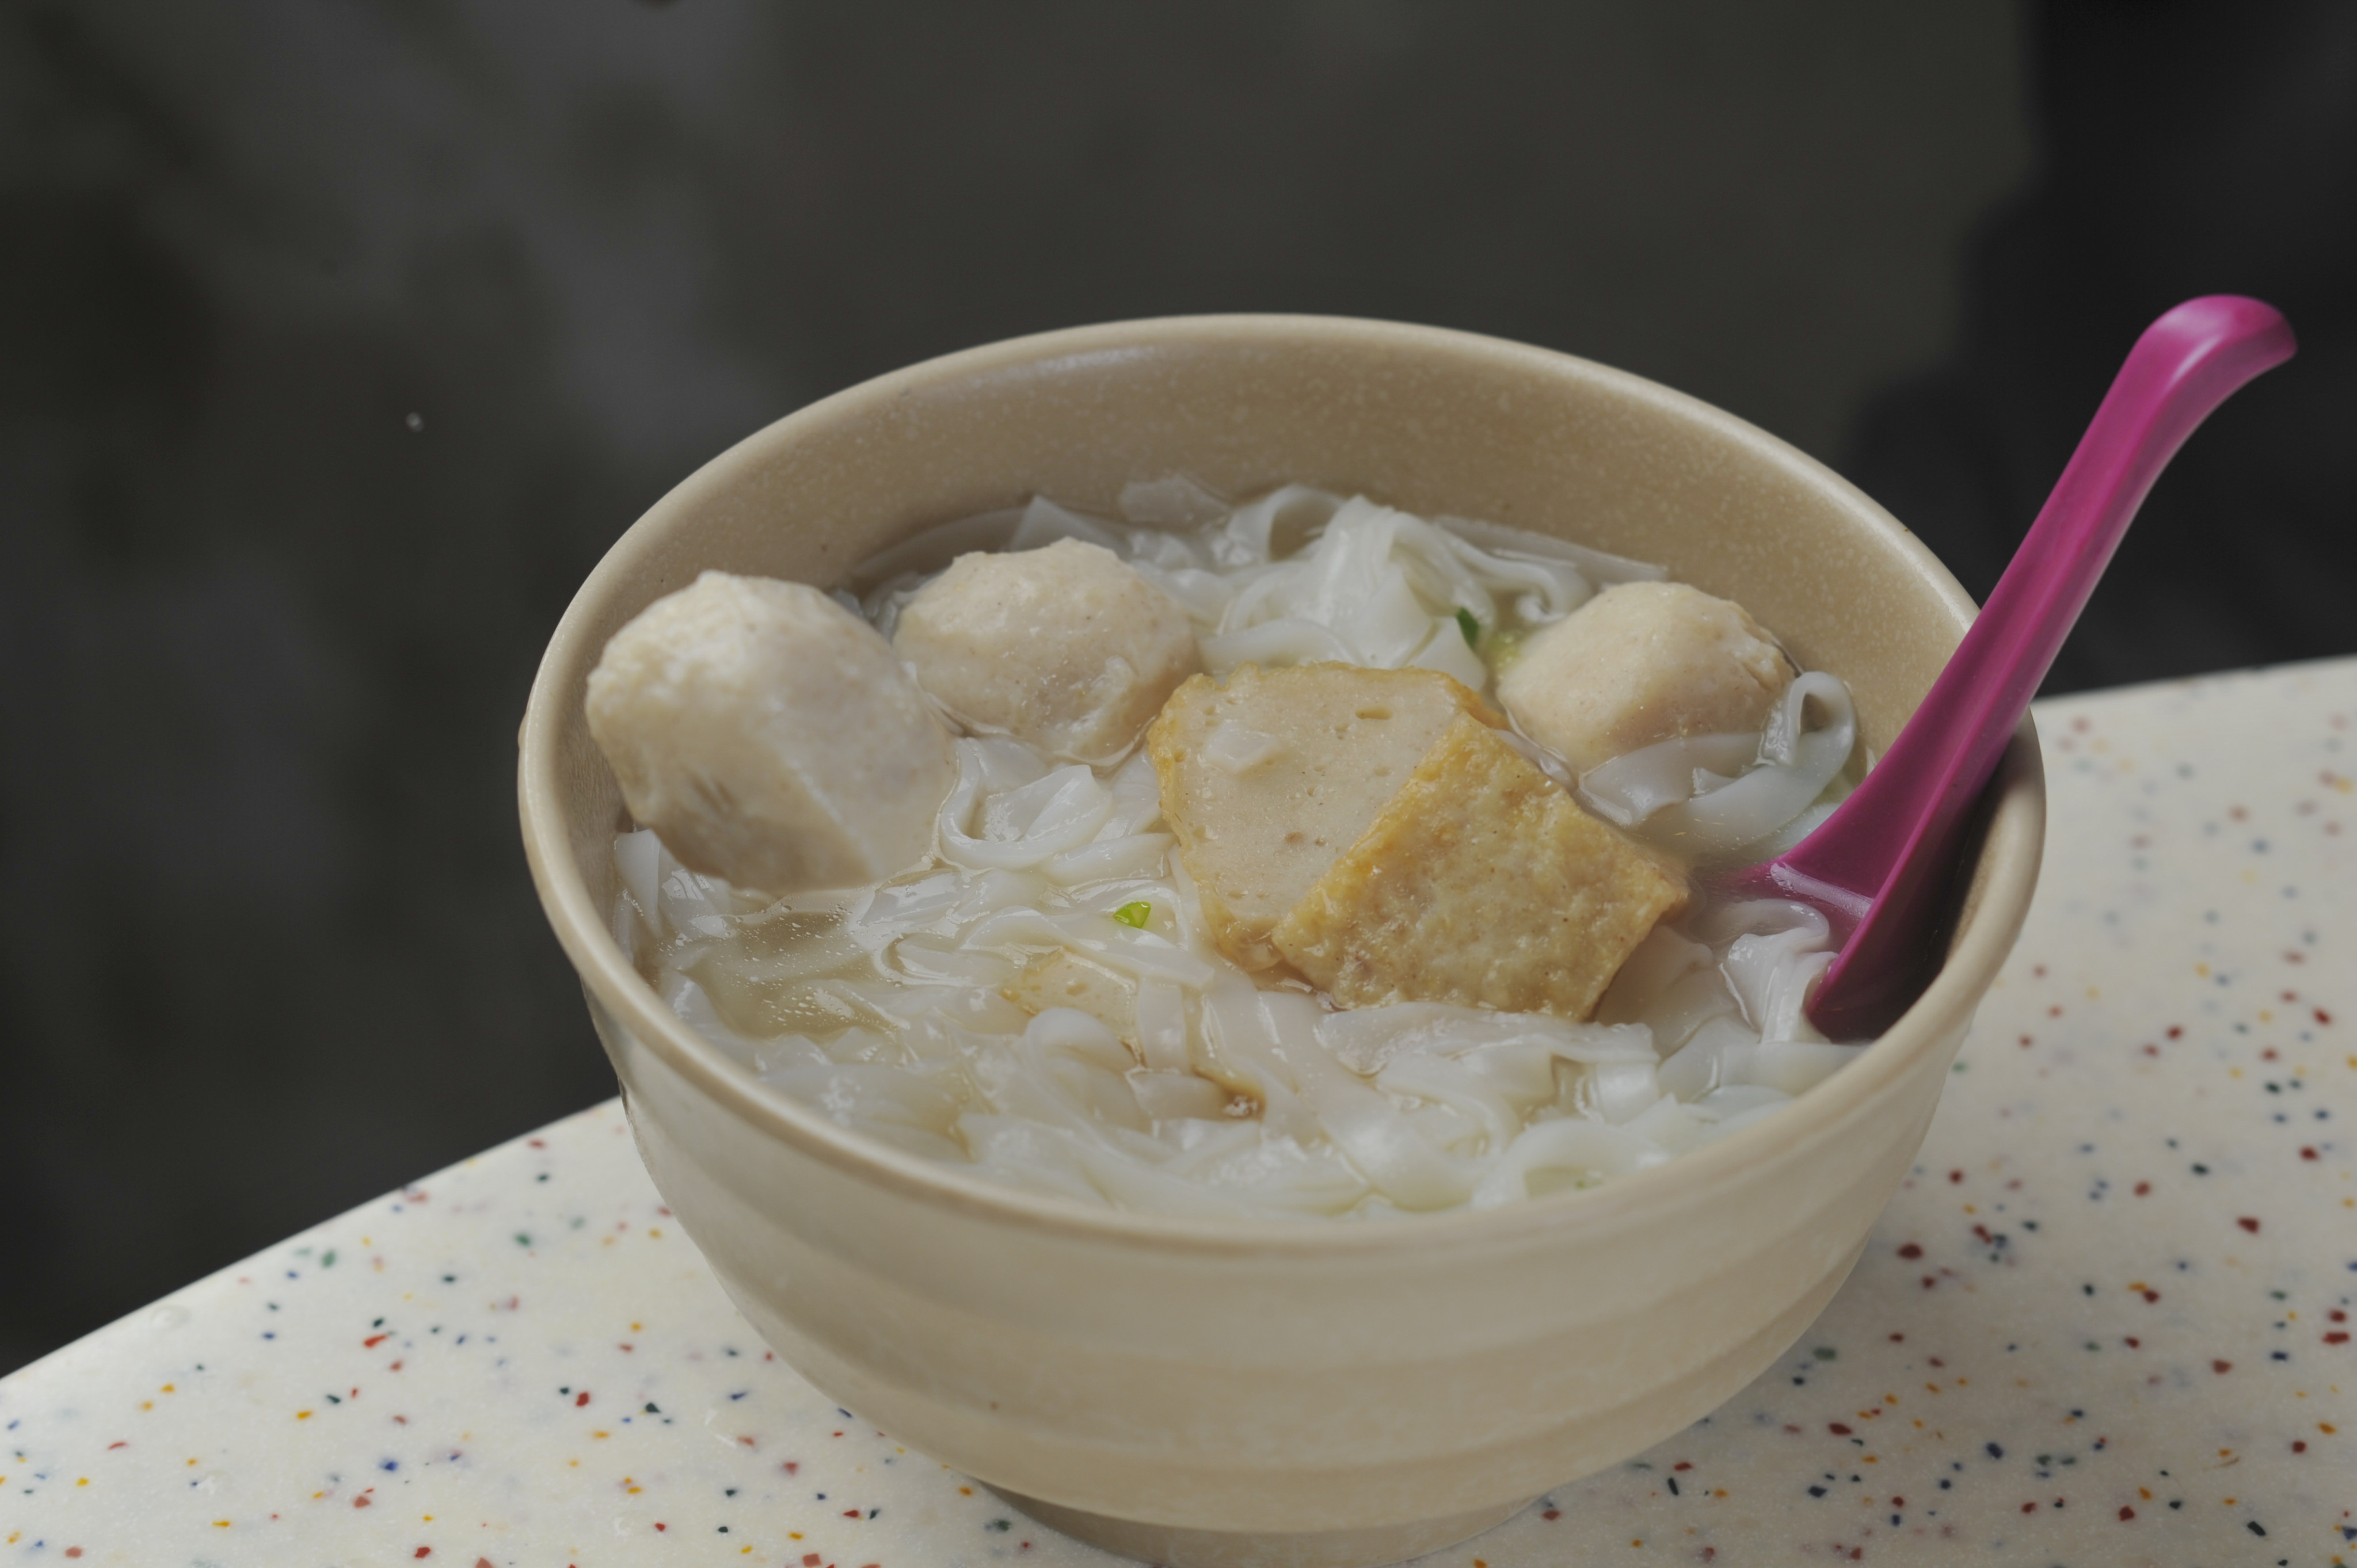 Fish ball noodles from On Lee Noodle in Shau Kei Wan, Hong Kong. Photo: SCMP